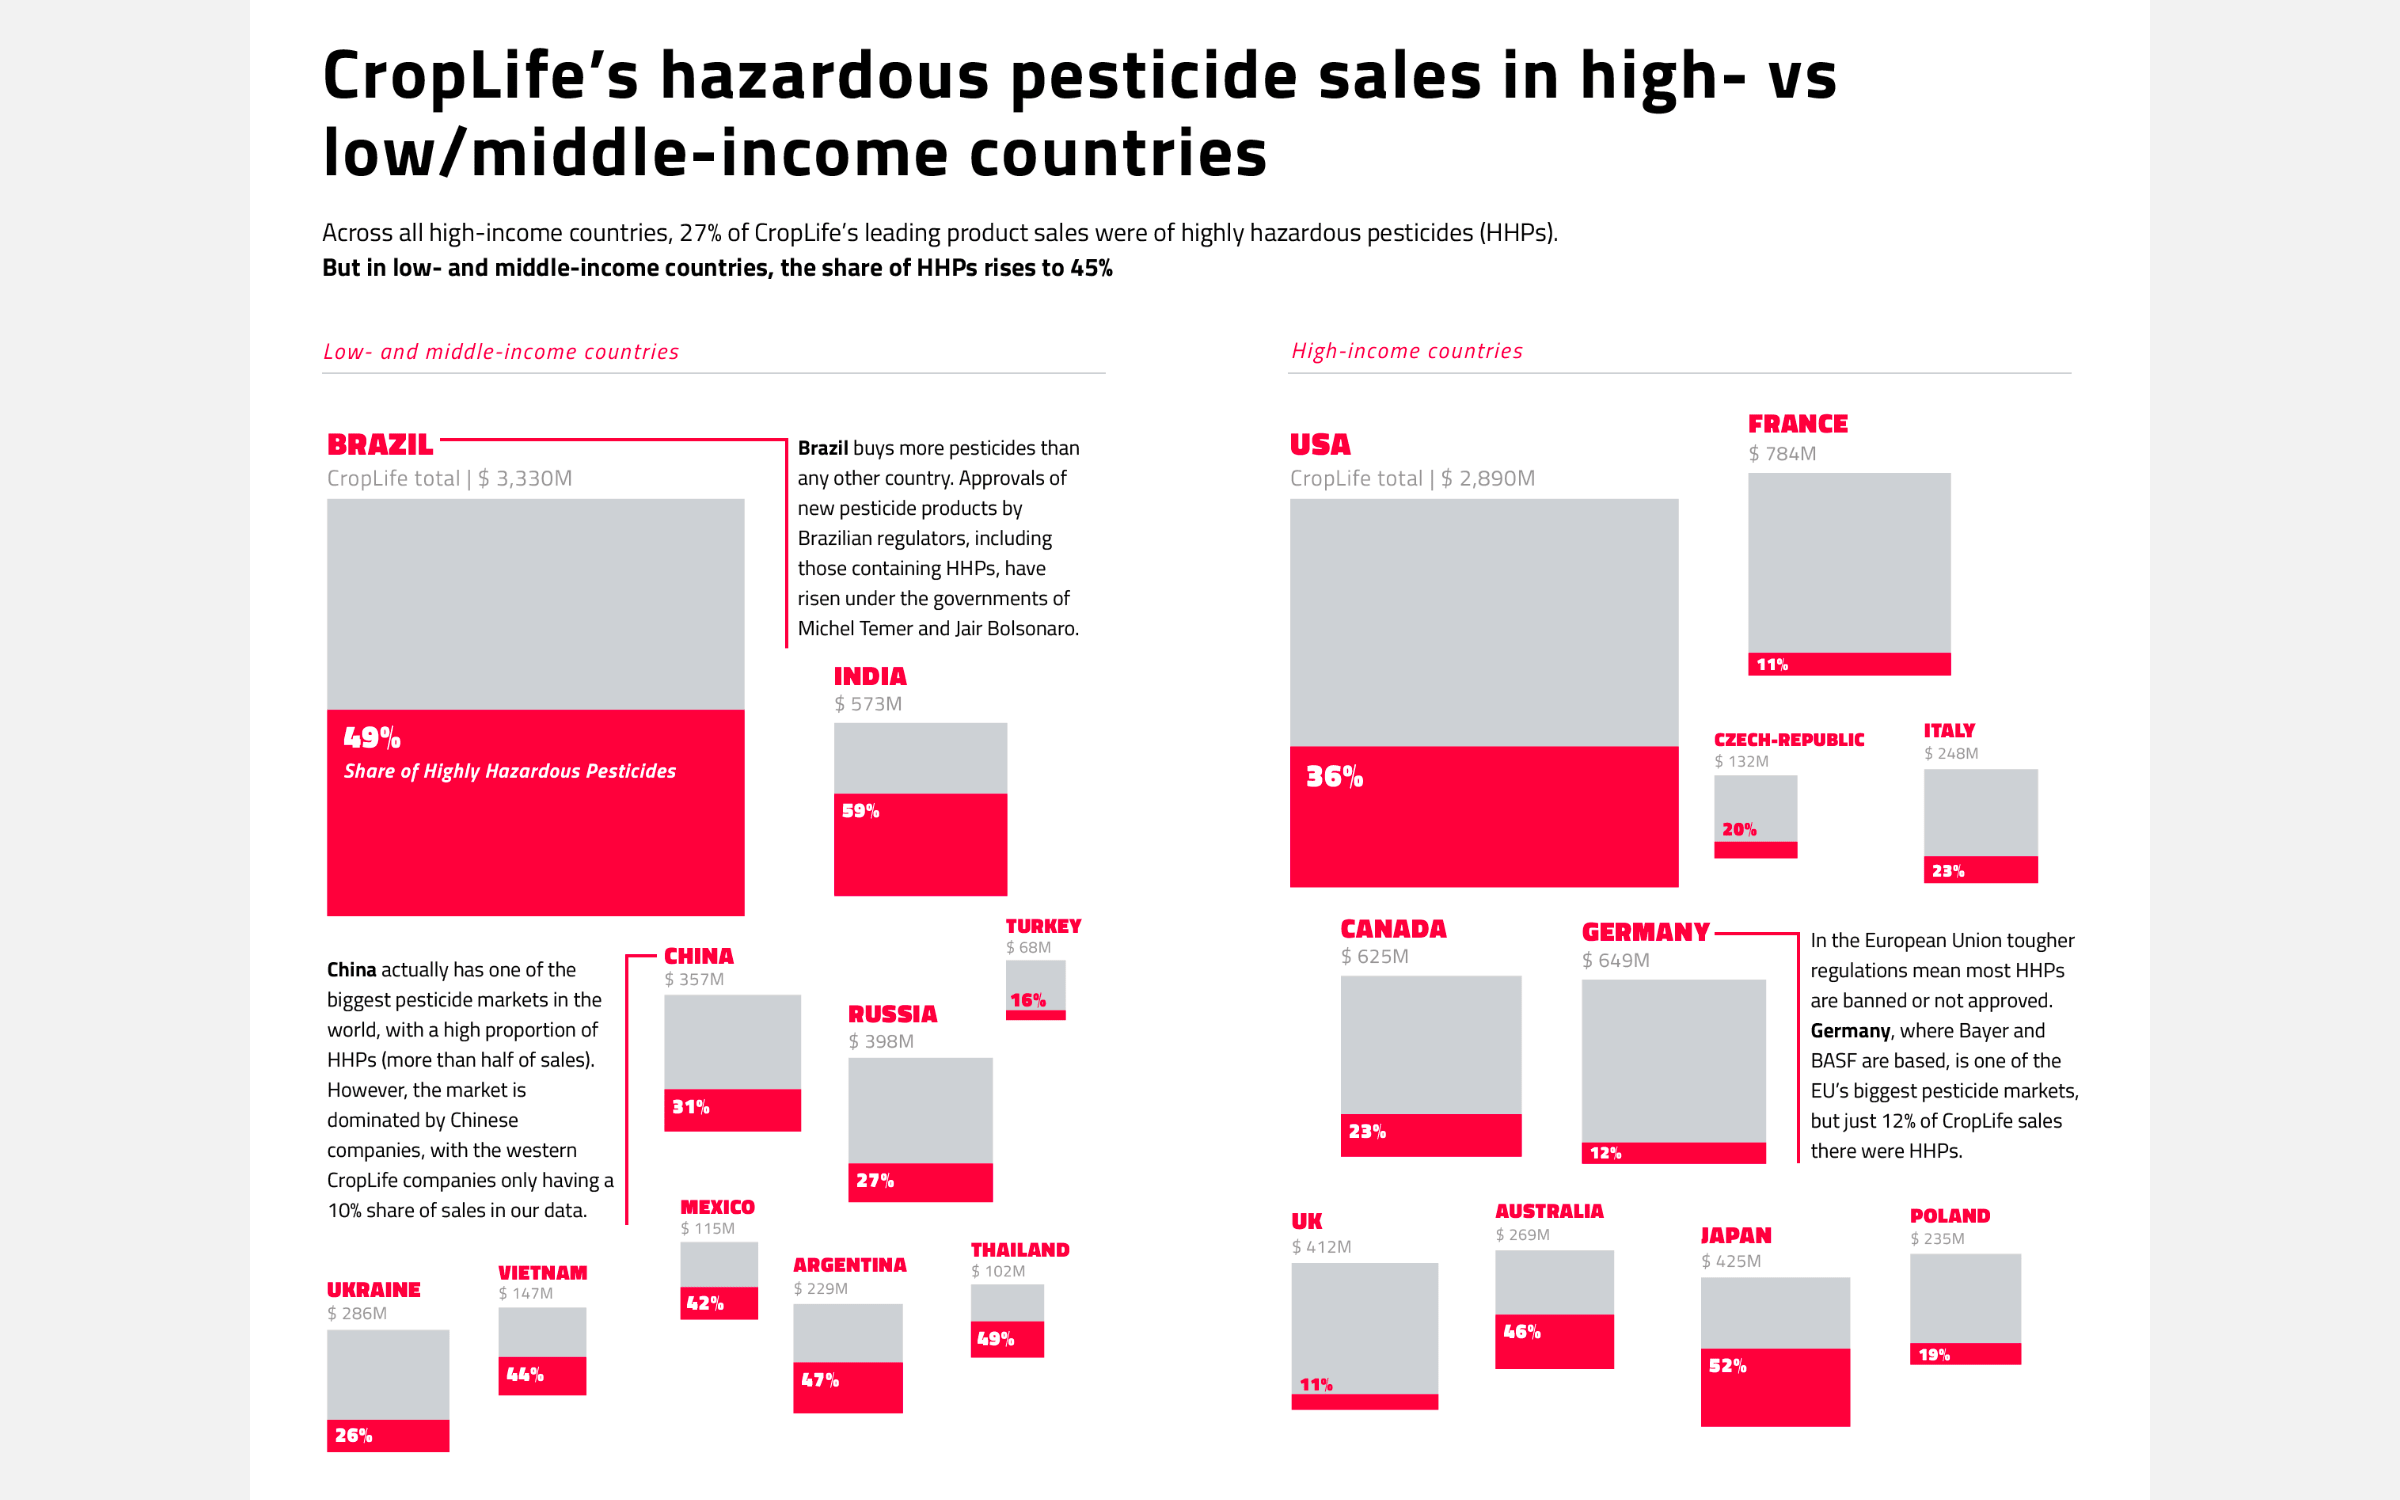 Comparing the percentage of sales between LMIC and high-income countries through a cluster of partially filled squares